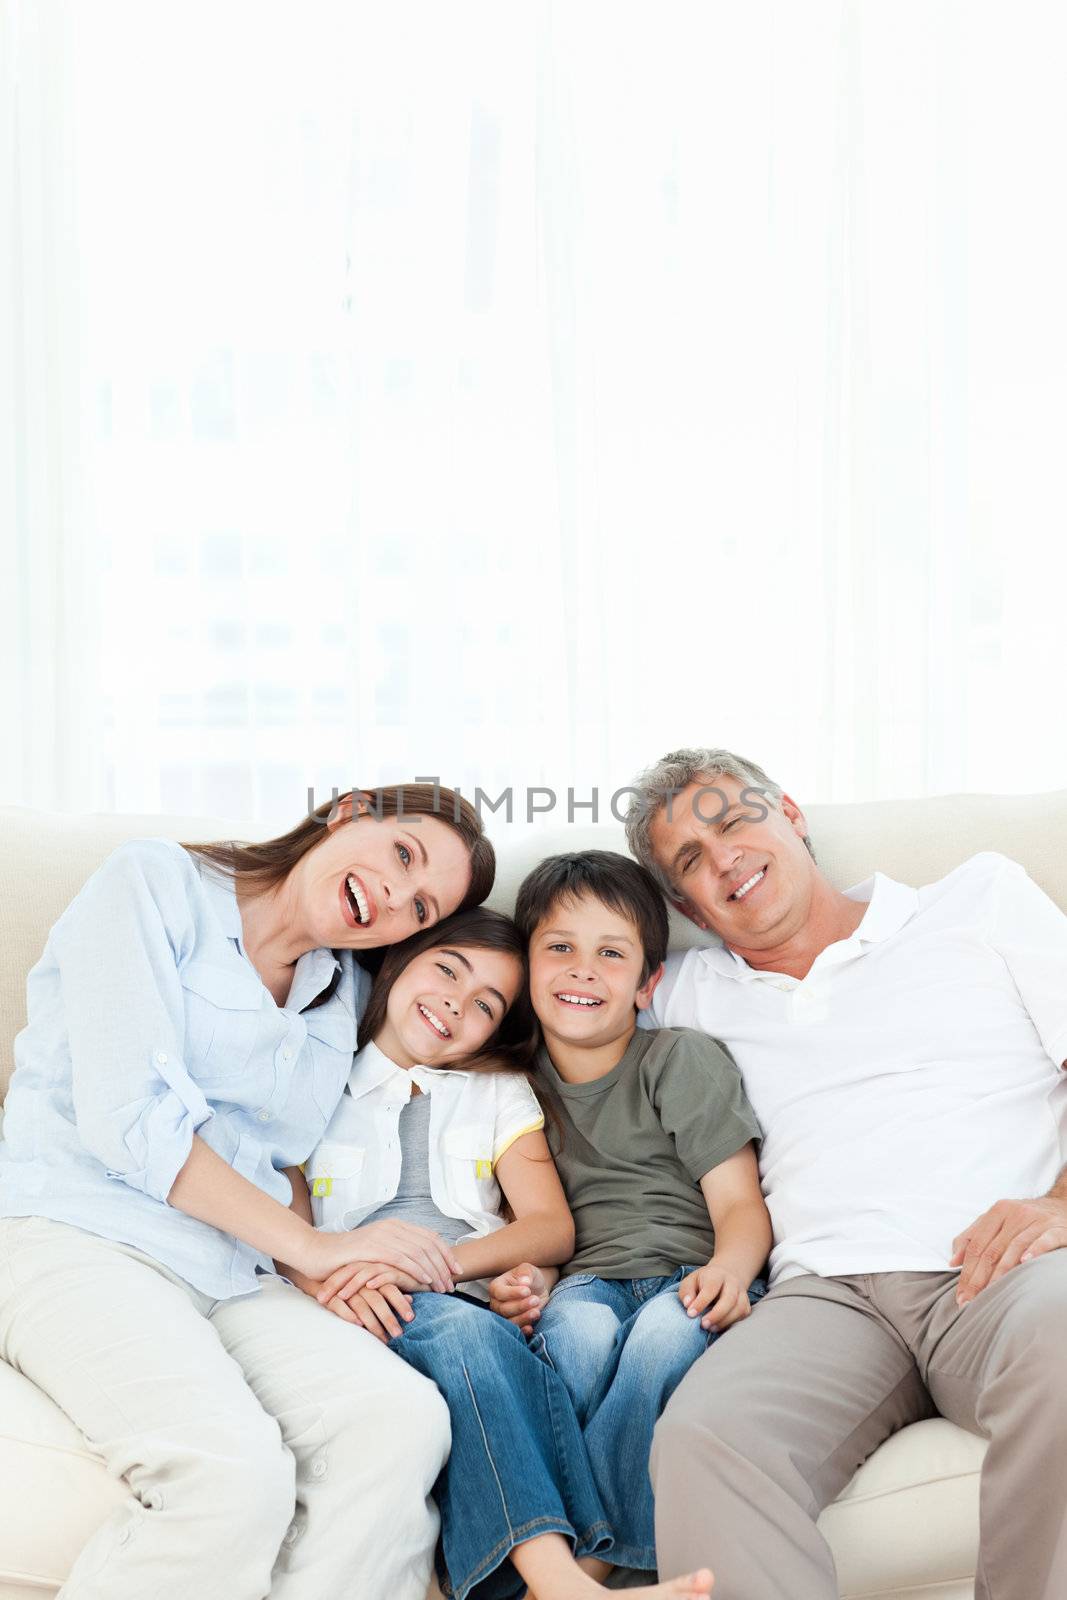 Portrait of a smiling family at home